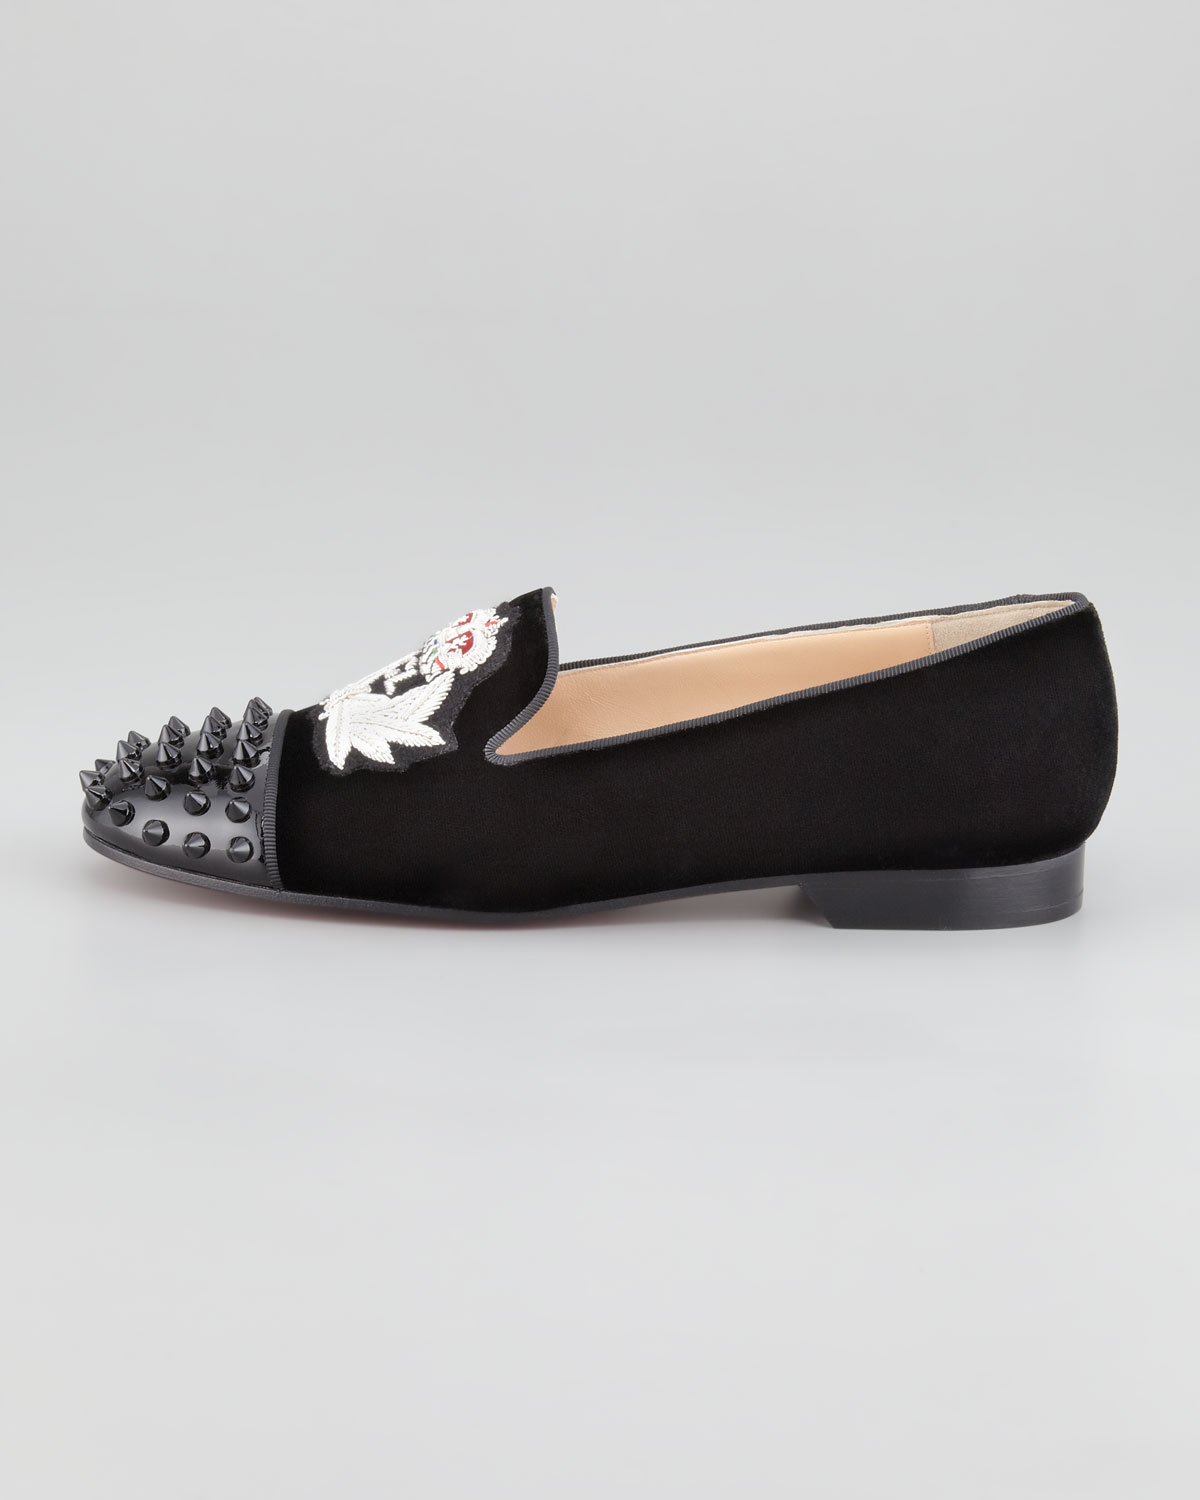 best replica shoes - Christian louboutin Intern Spiked Velvet Red Sole Loafer in Black ...